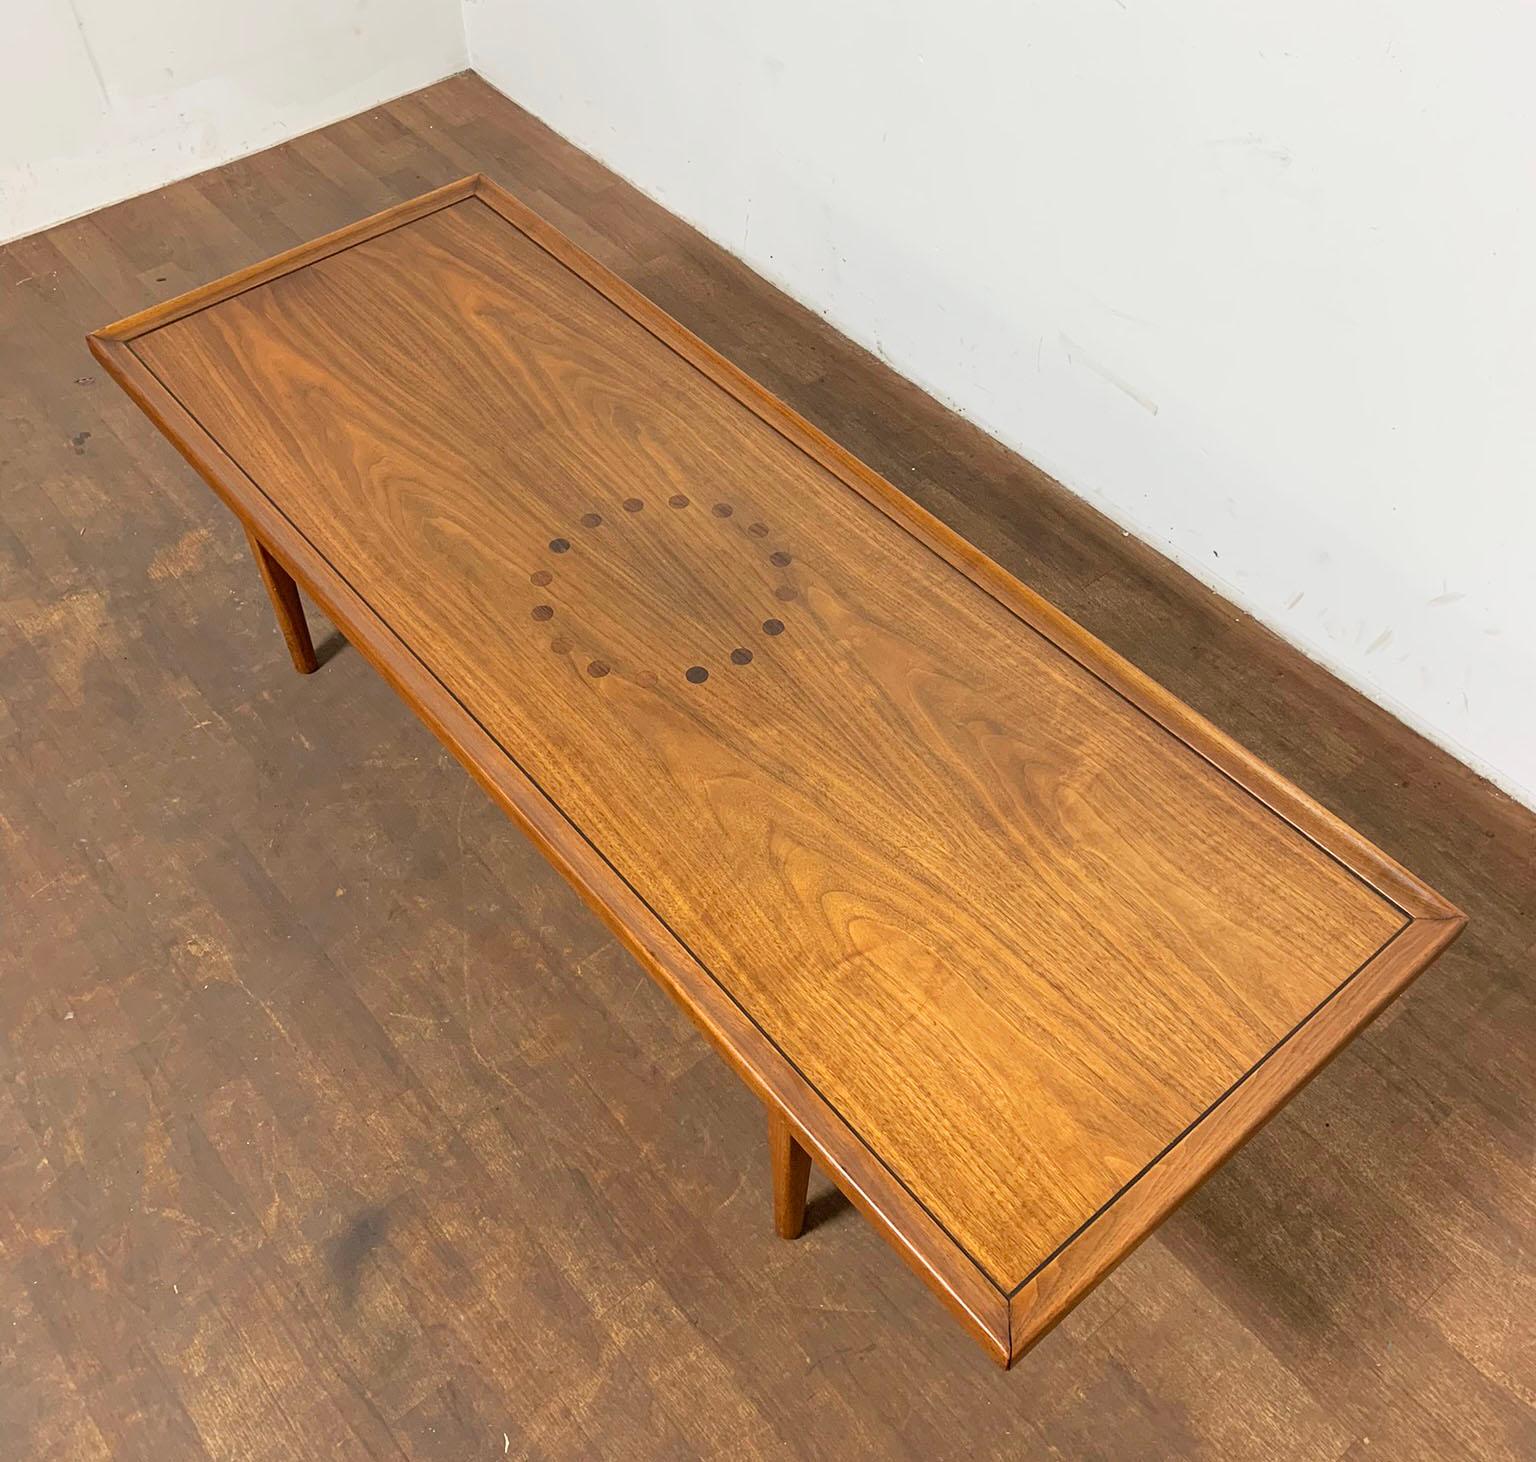 A walnut coffee table with contrasting teak inlay designed by Stewart MacDougall & Kipp Stewart for their Declaration Line for Drexel, circa 1950s.

